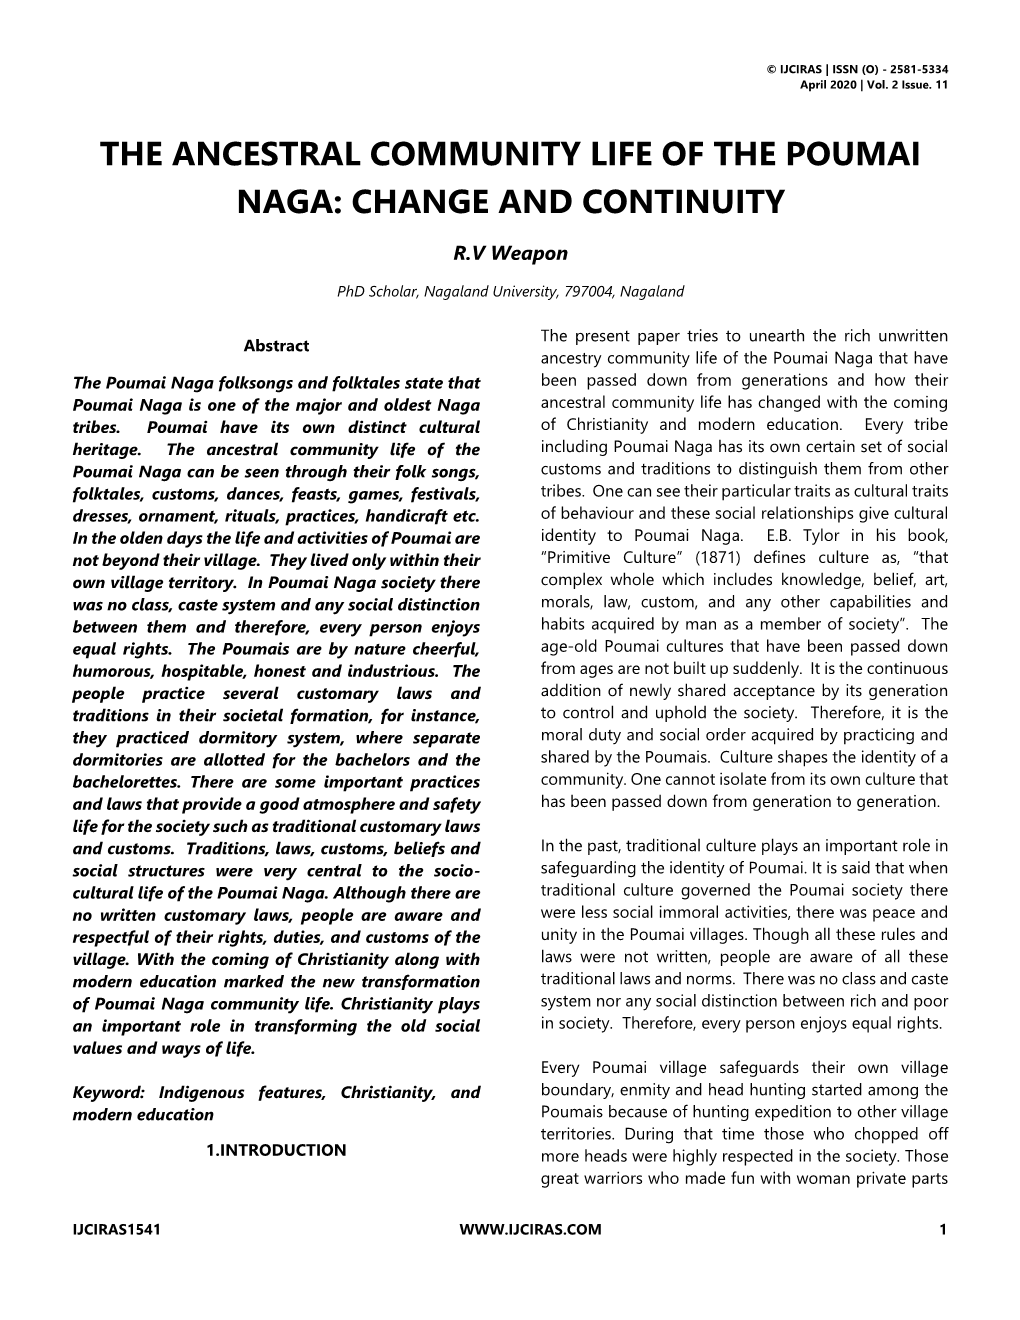 The Ancestral Community Life of the Poumai Naga: Change and Continuity